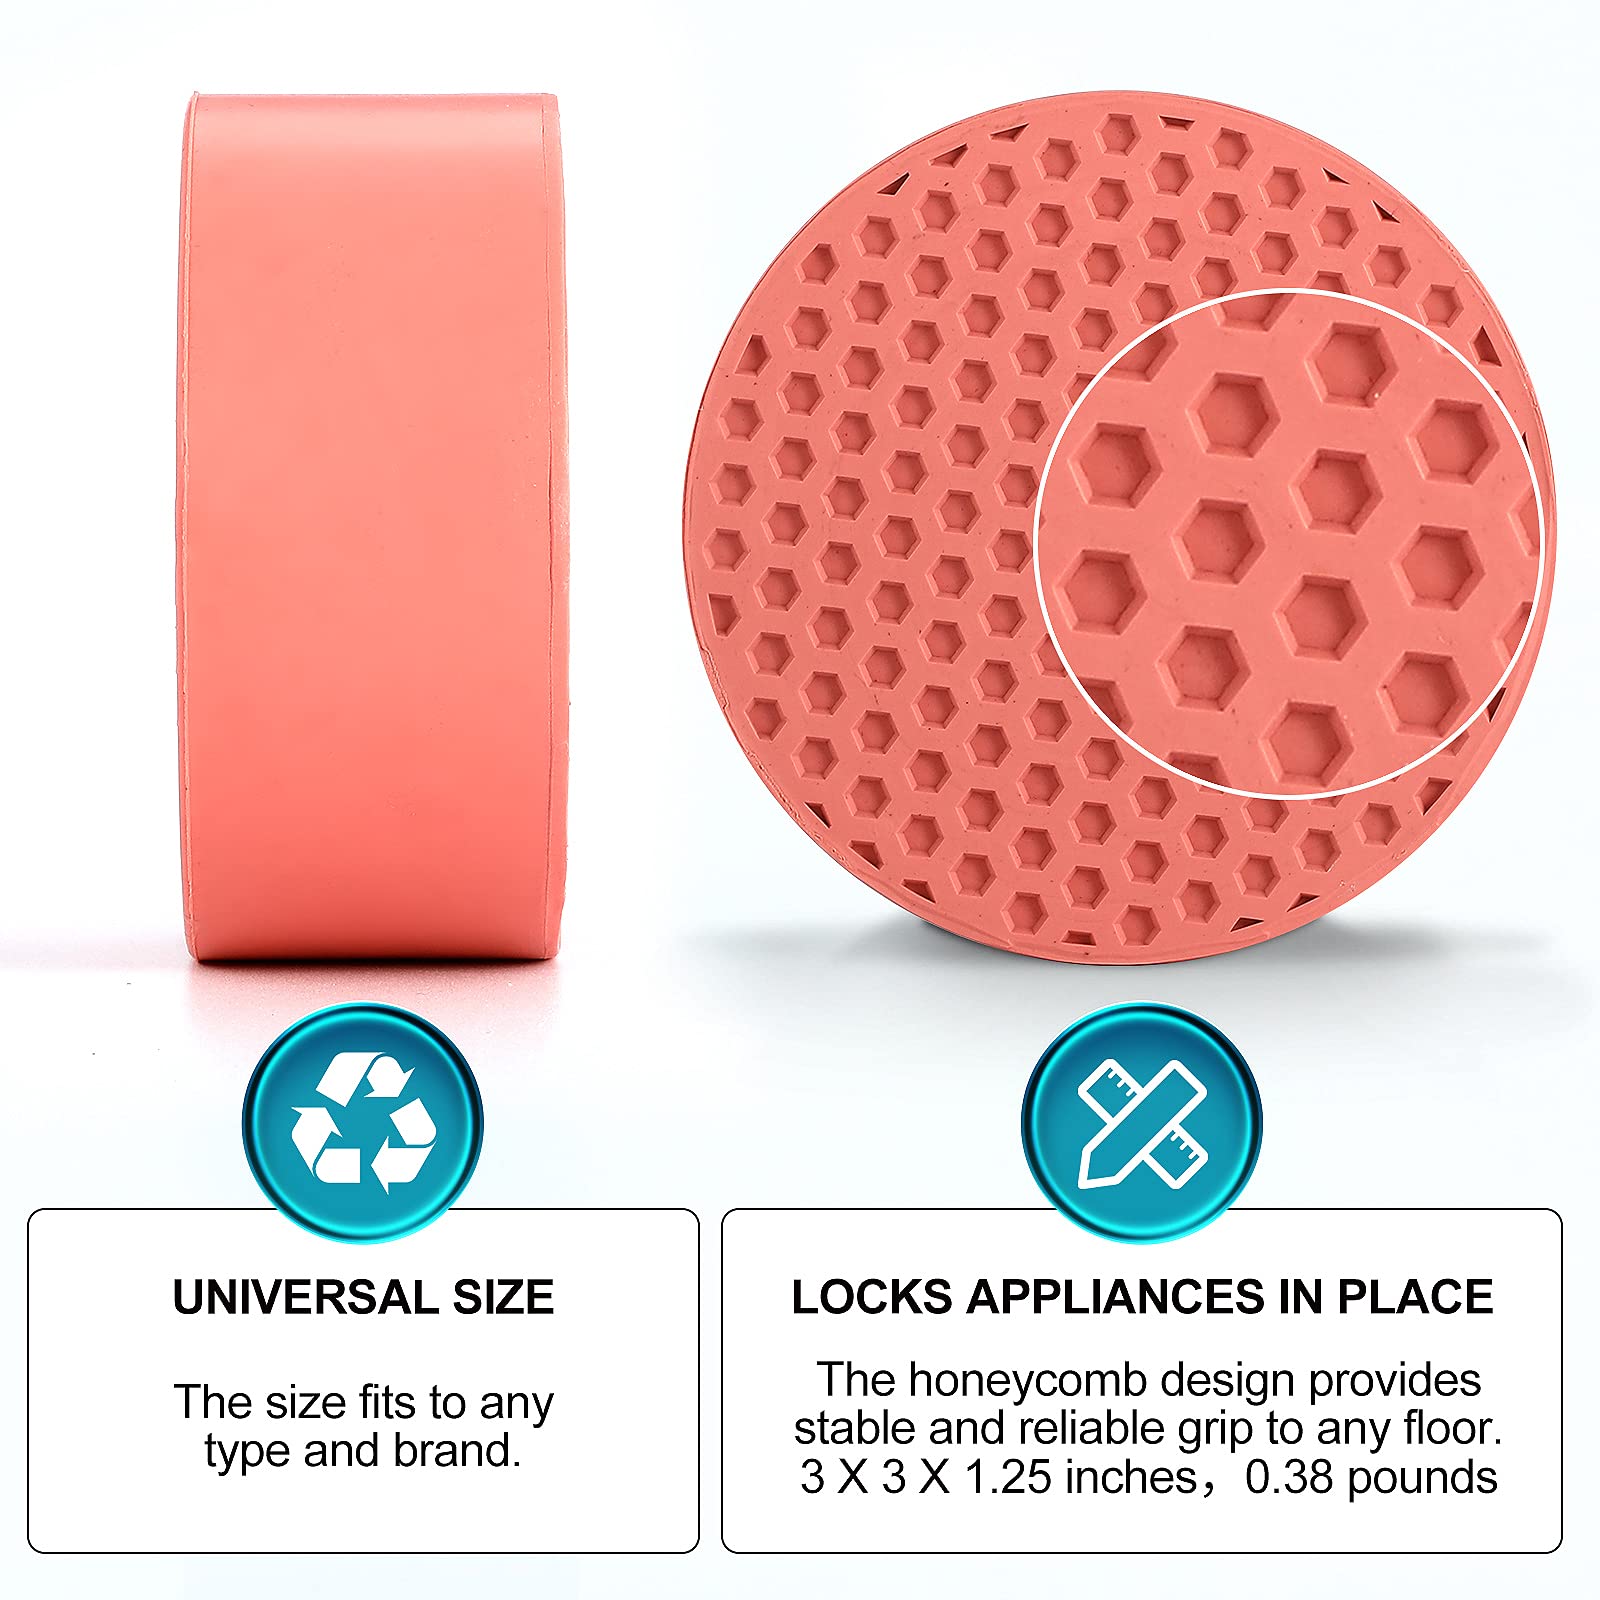 Anti Vibration Pads for Washing Machine, Noise Dampening Non-Slip Support Feet Stabilizer Mat Washer Dryer Appliance Fit All Machines, Protects Laundry Room Floor, 4 Pink Anti Vibrasion Pads + Level